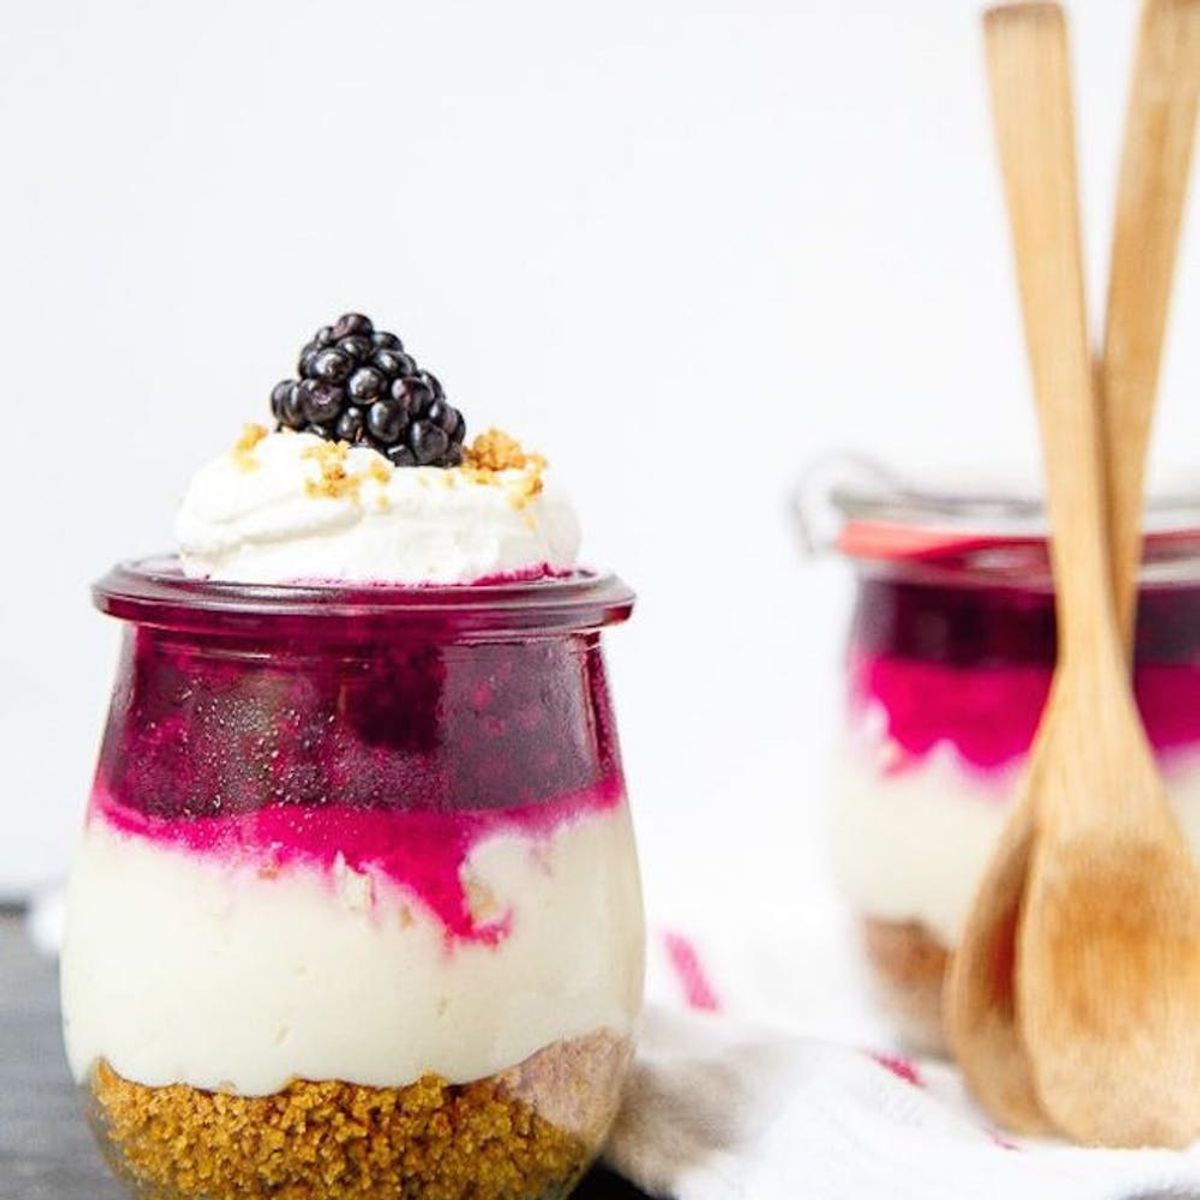 12 Simple No-Bake Dessert Recipes to Whip Up This Weekend - Brit + Co